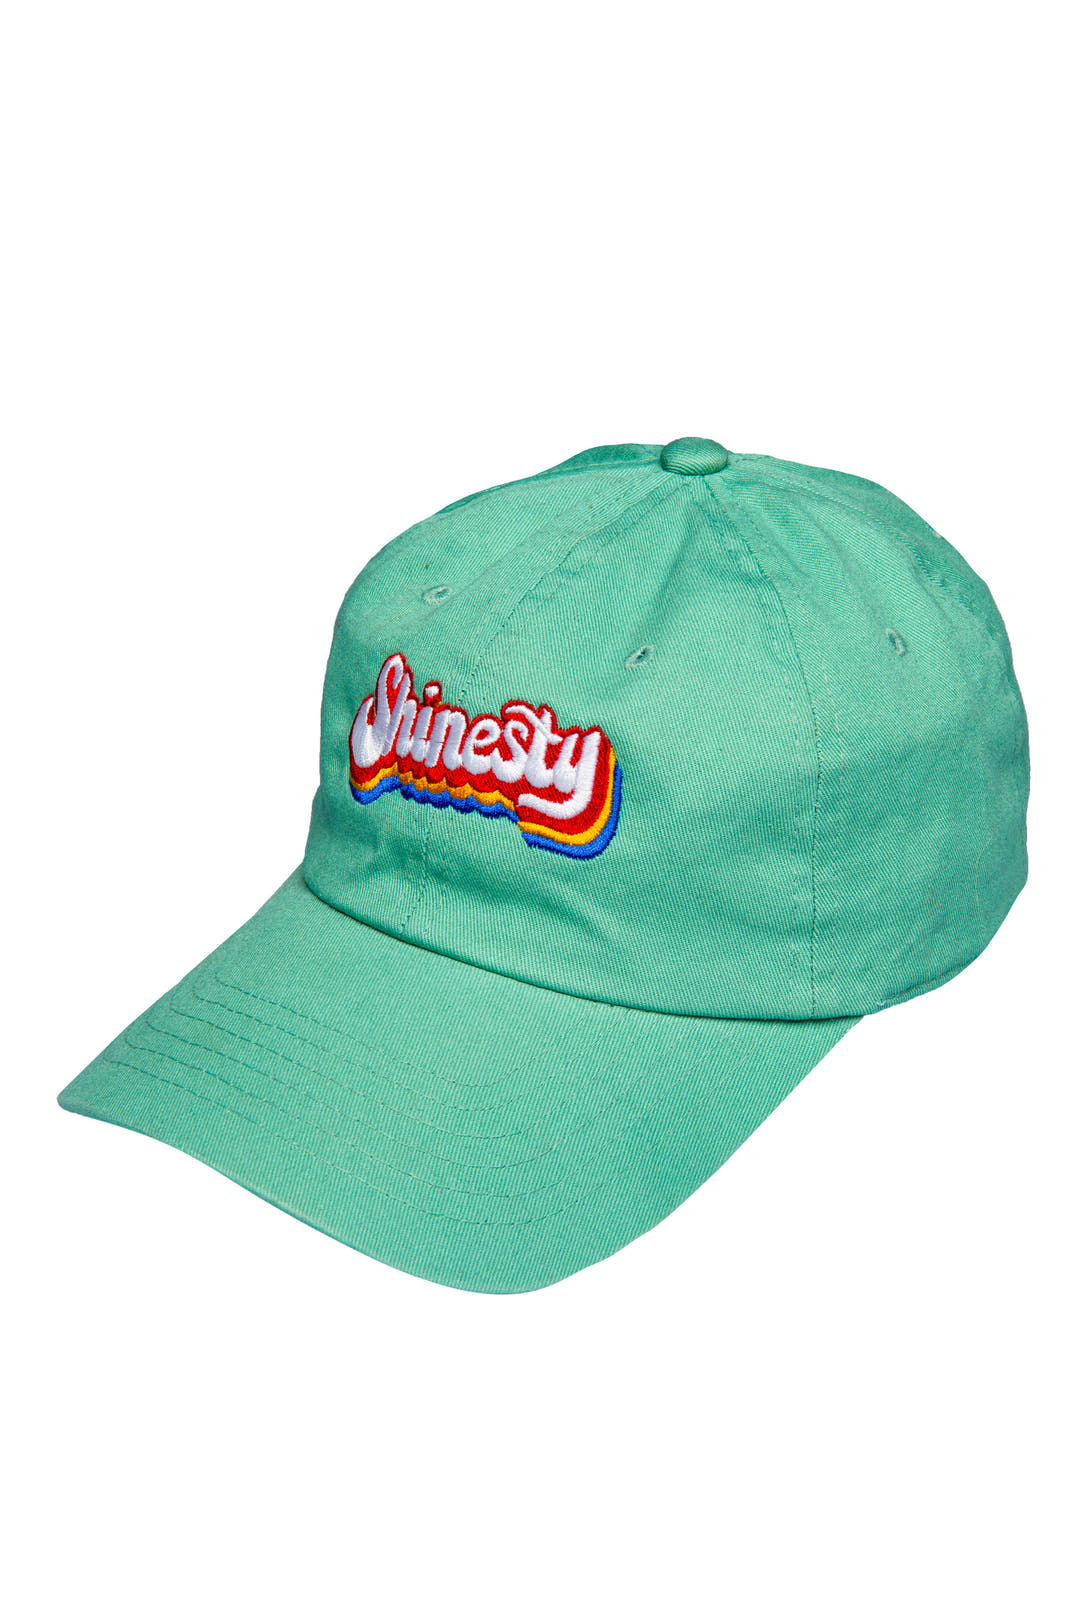 Teal Retro Shinesty Dad Hat | The Big Day Sport